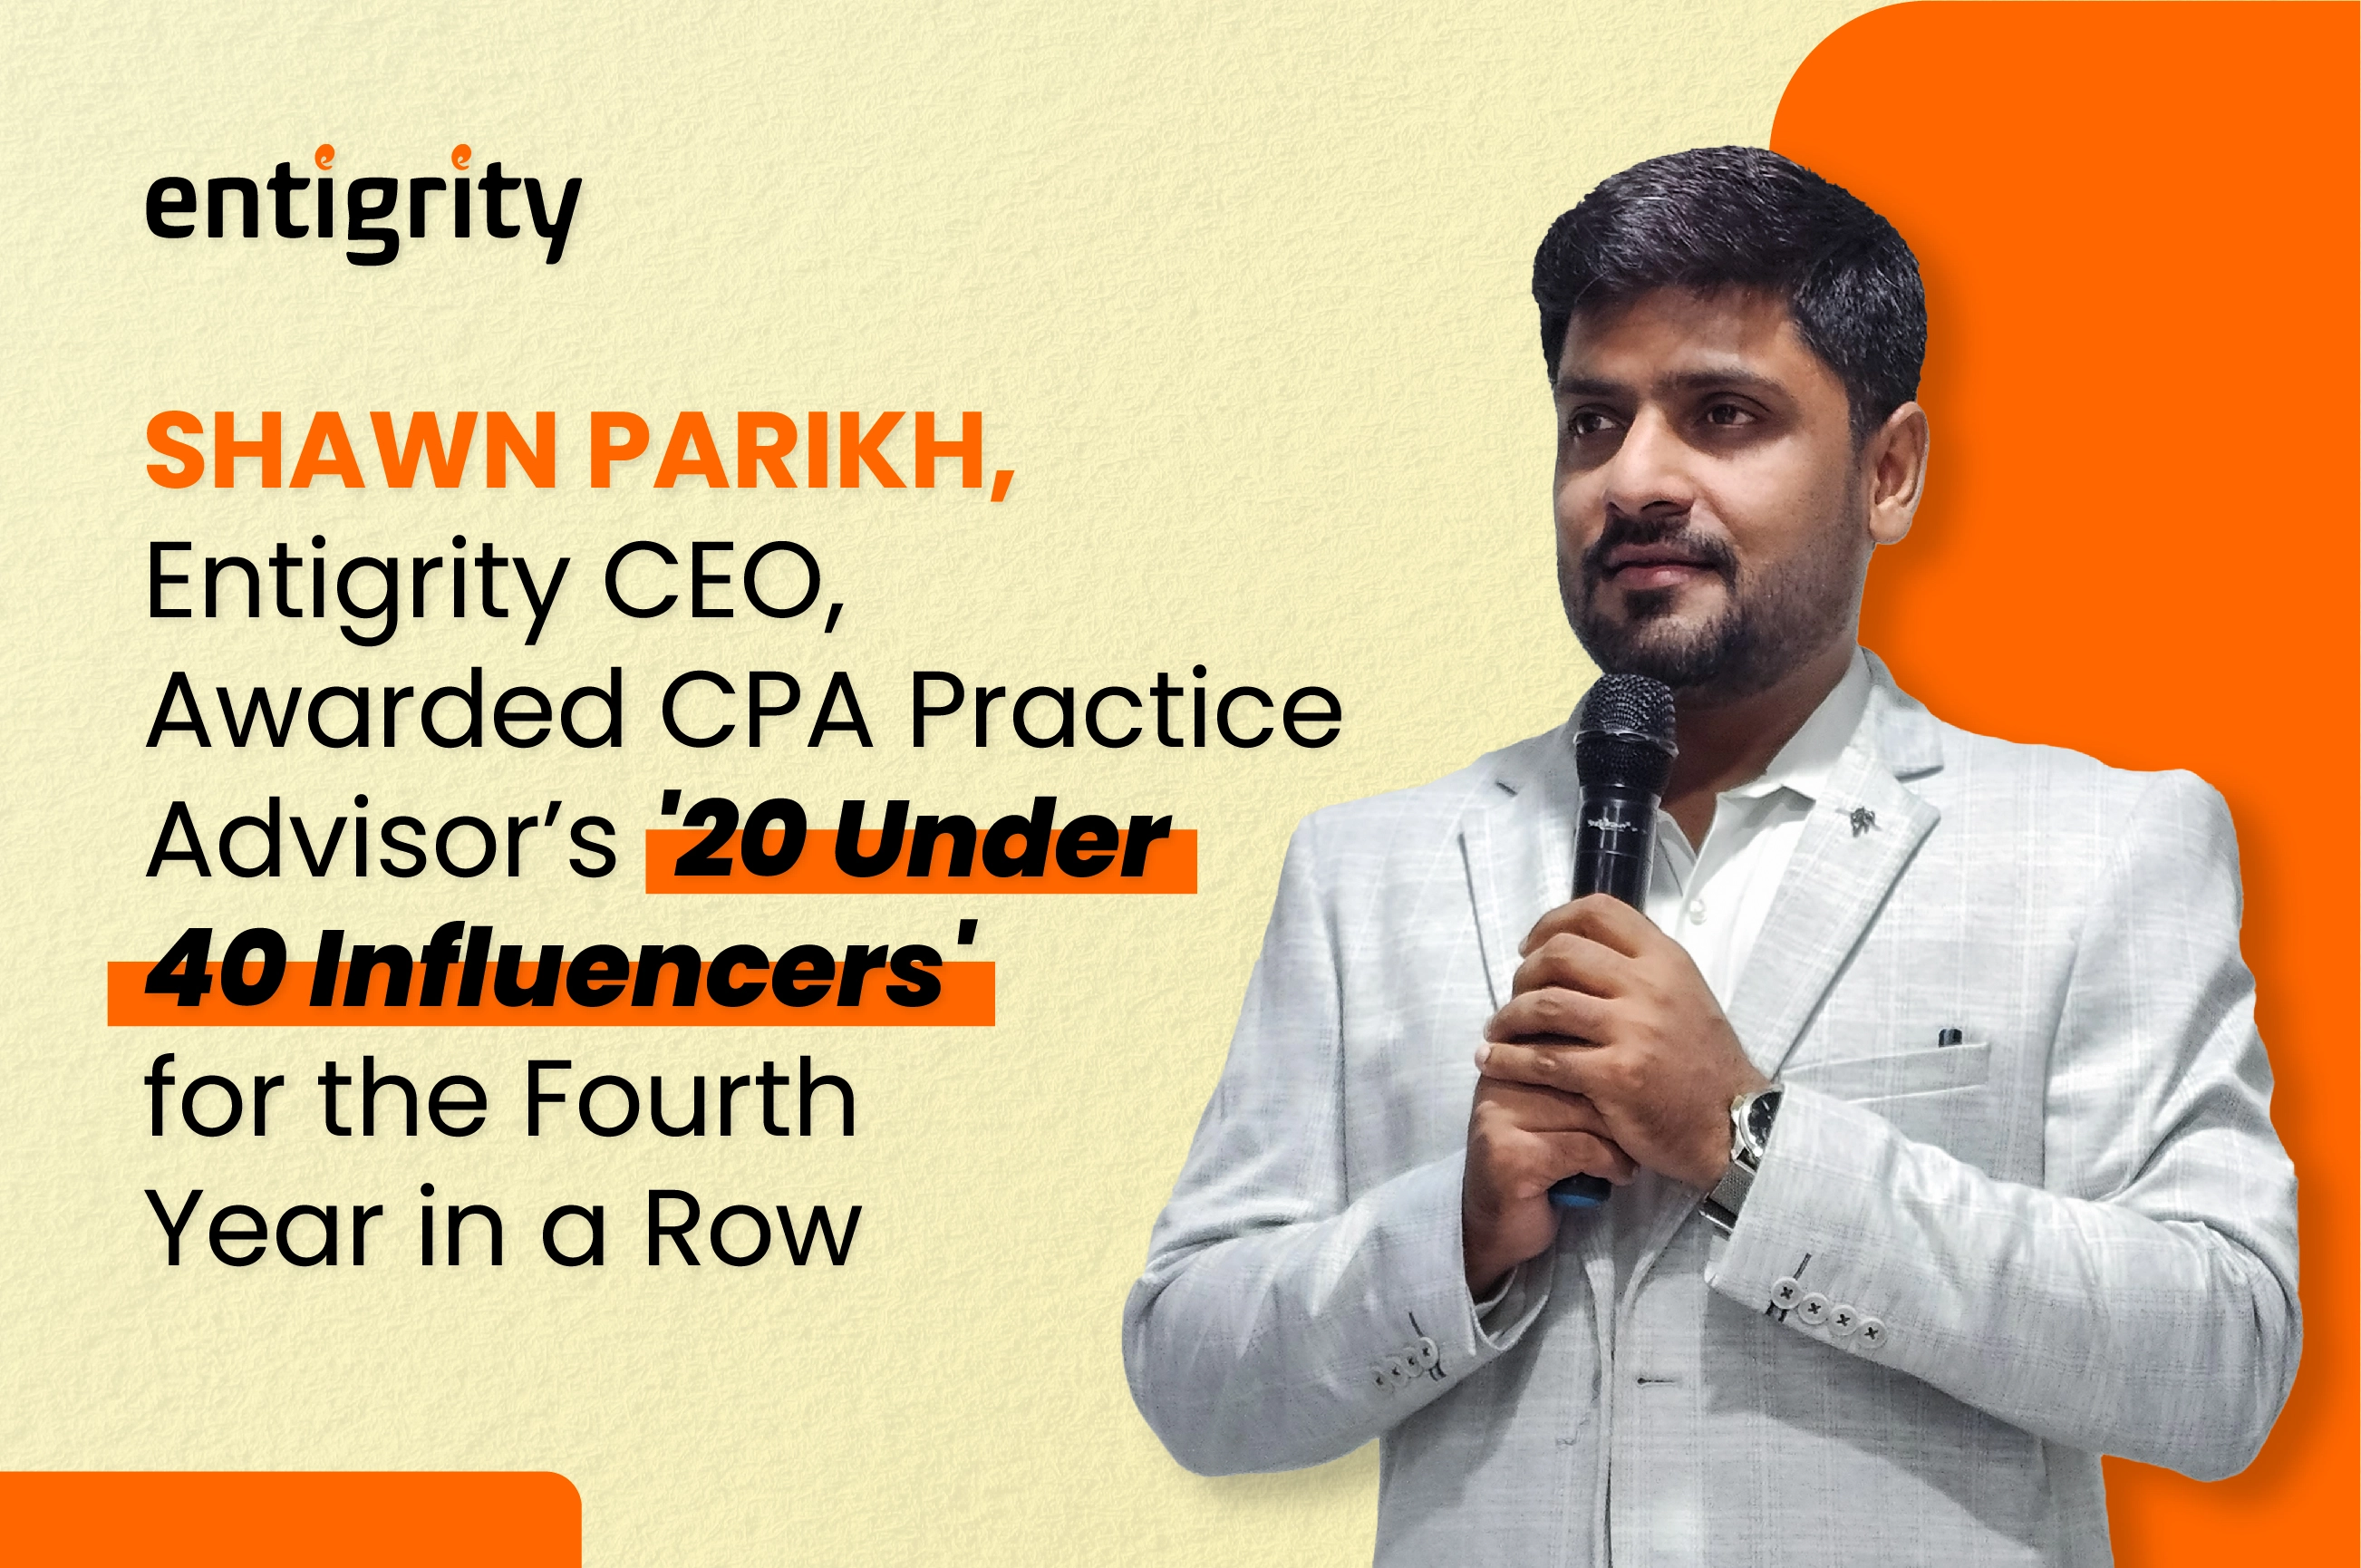 Shawn Parikh, CEO of Entigrity wins '20 Under 40 Influencers' Award for the Fourth Year